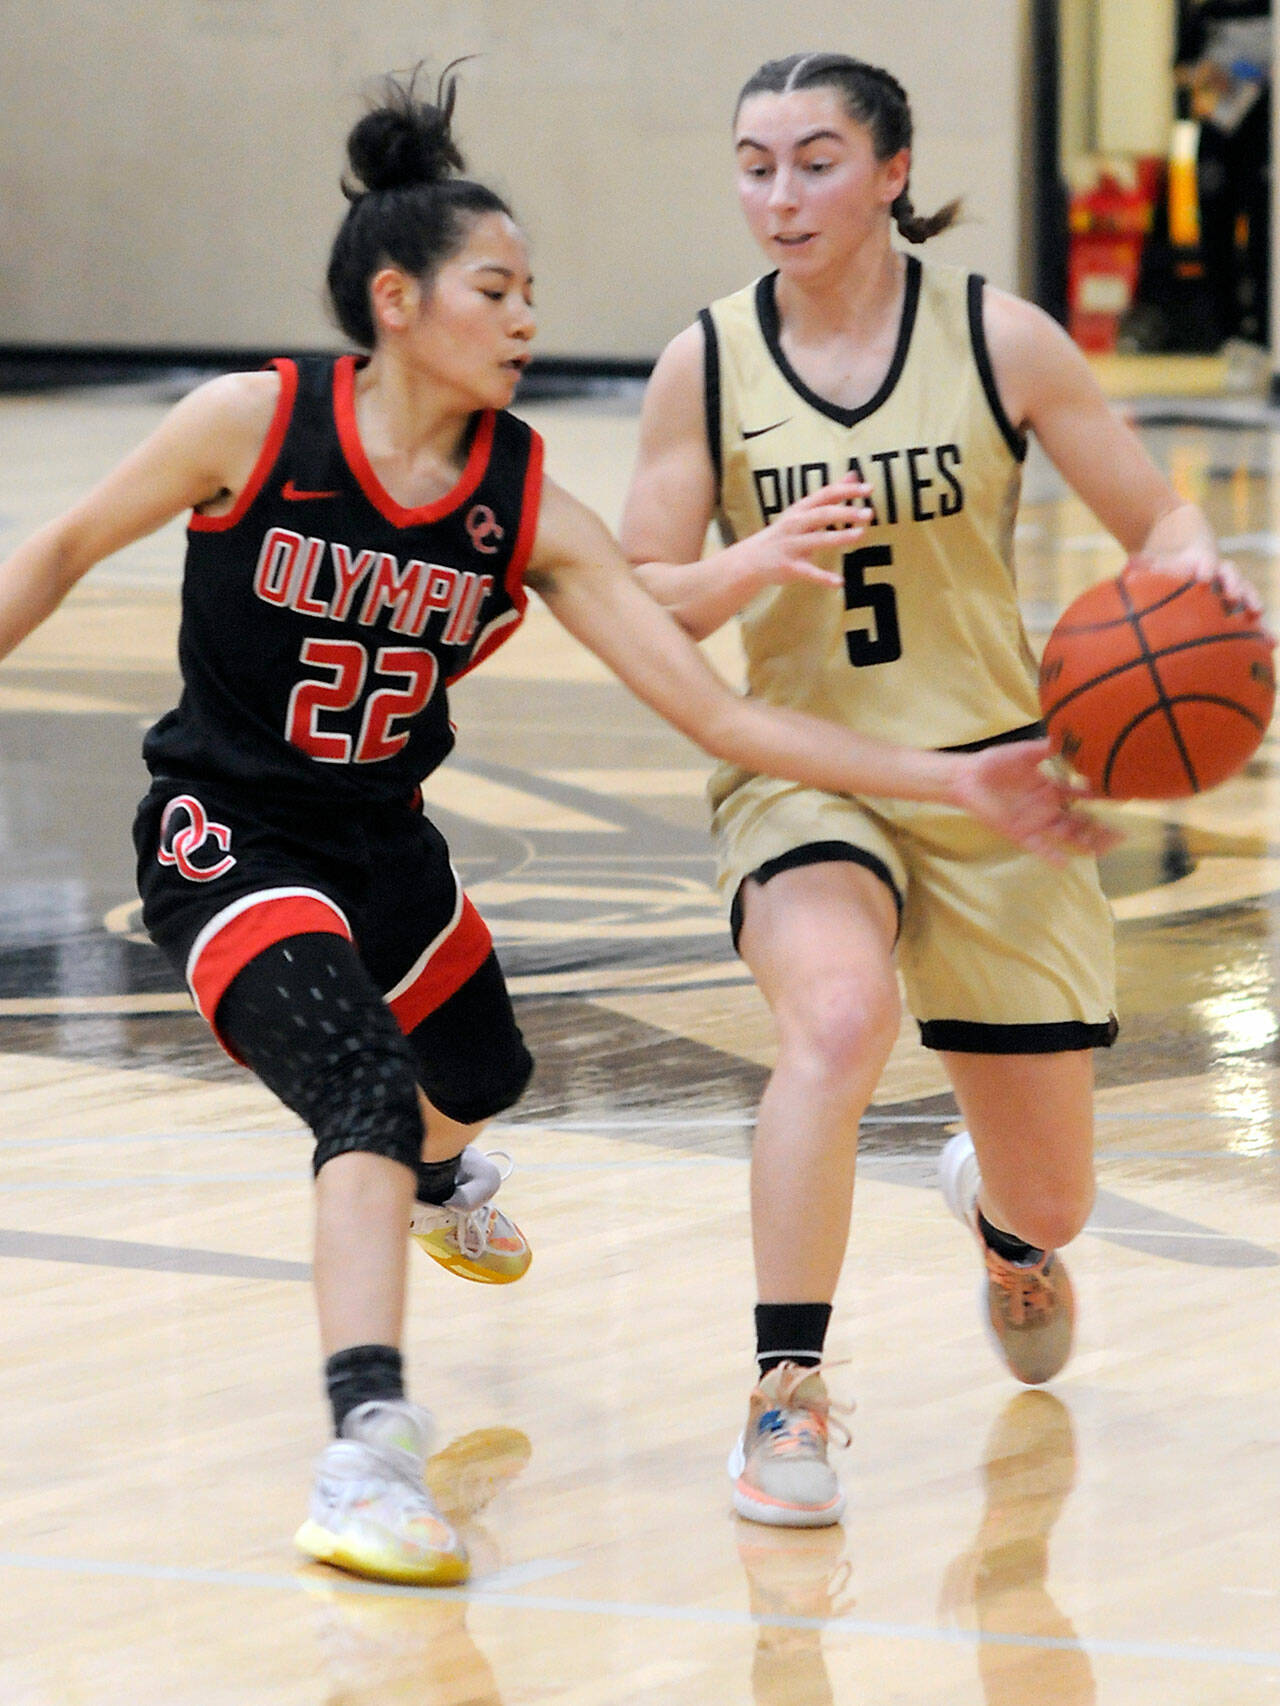 Peninsula’s Talia Marini, right, drives downcourt as Olympic’s Missy May Valdez tries to tip away the ball on Saturday in Port Angeles. (Keith Thorpe/Peninsula Daily News)